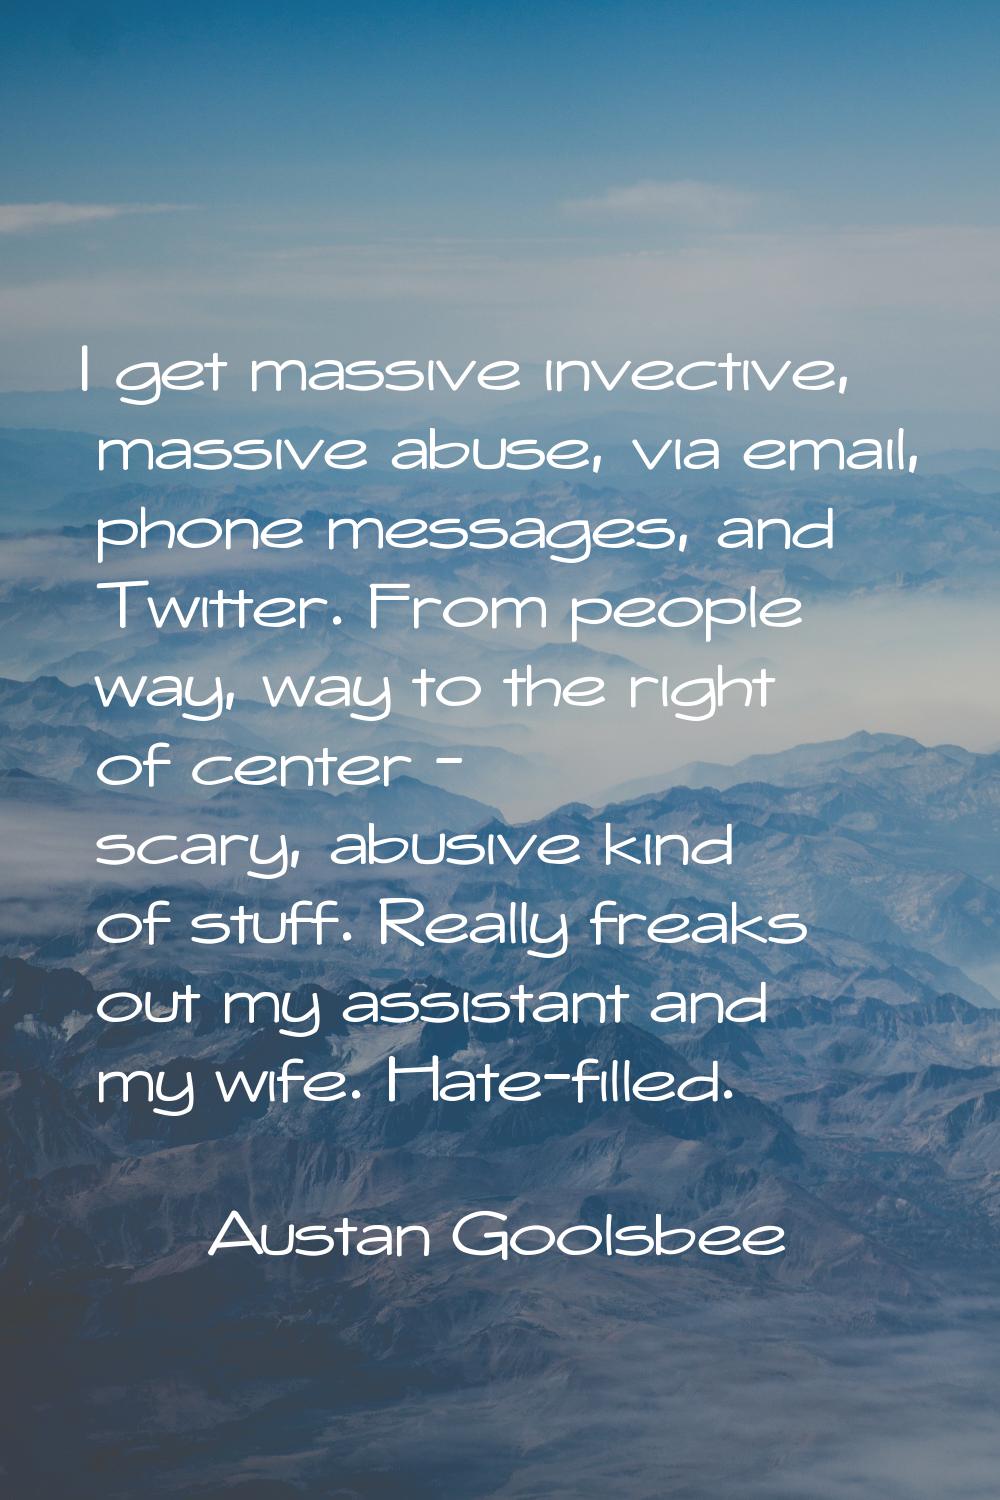 I get massive invective, massive abuse, via email, phone messages, and Twitter. From people way, wa